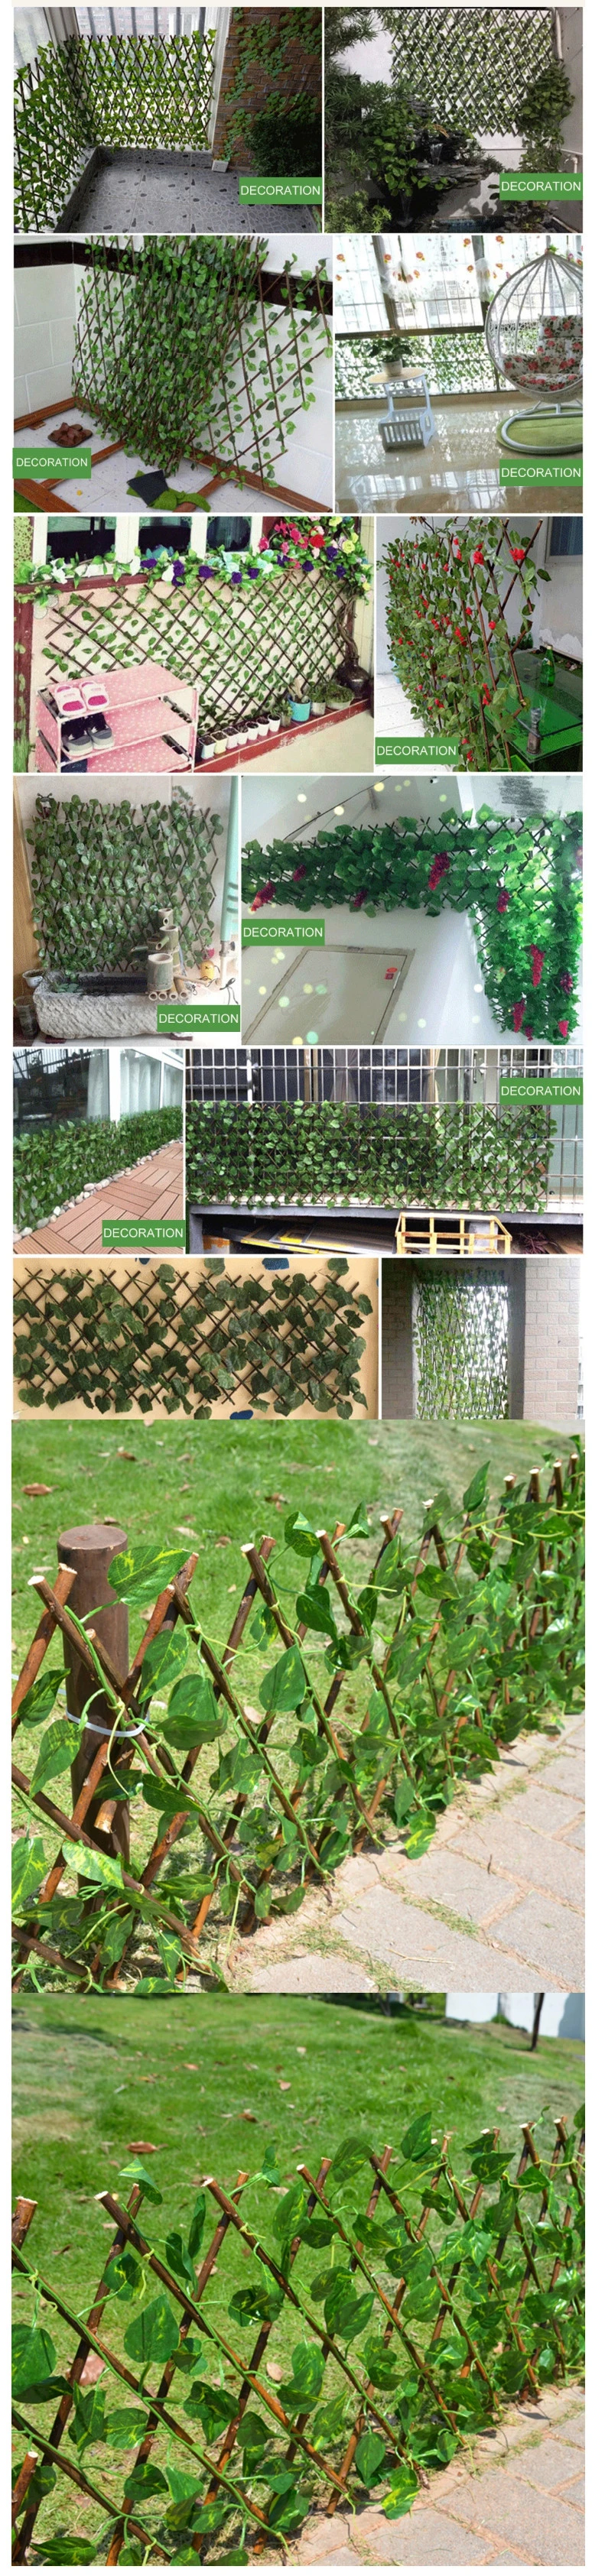 Laurel Plastic Greenery Leaves Fence Privacy Screen Plants Artificial IVY Privacy Screen Fence